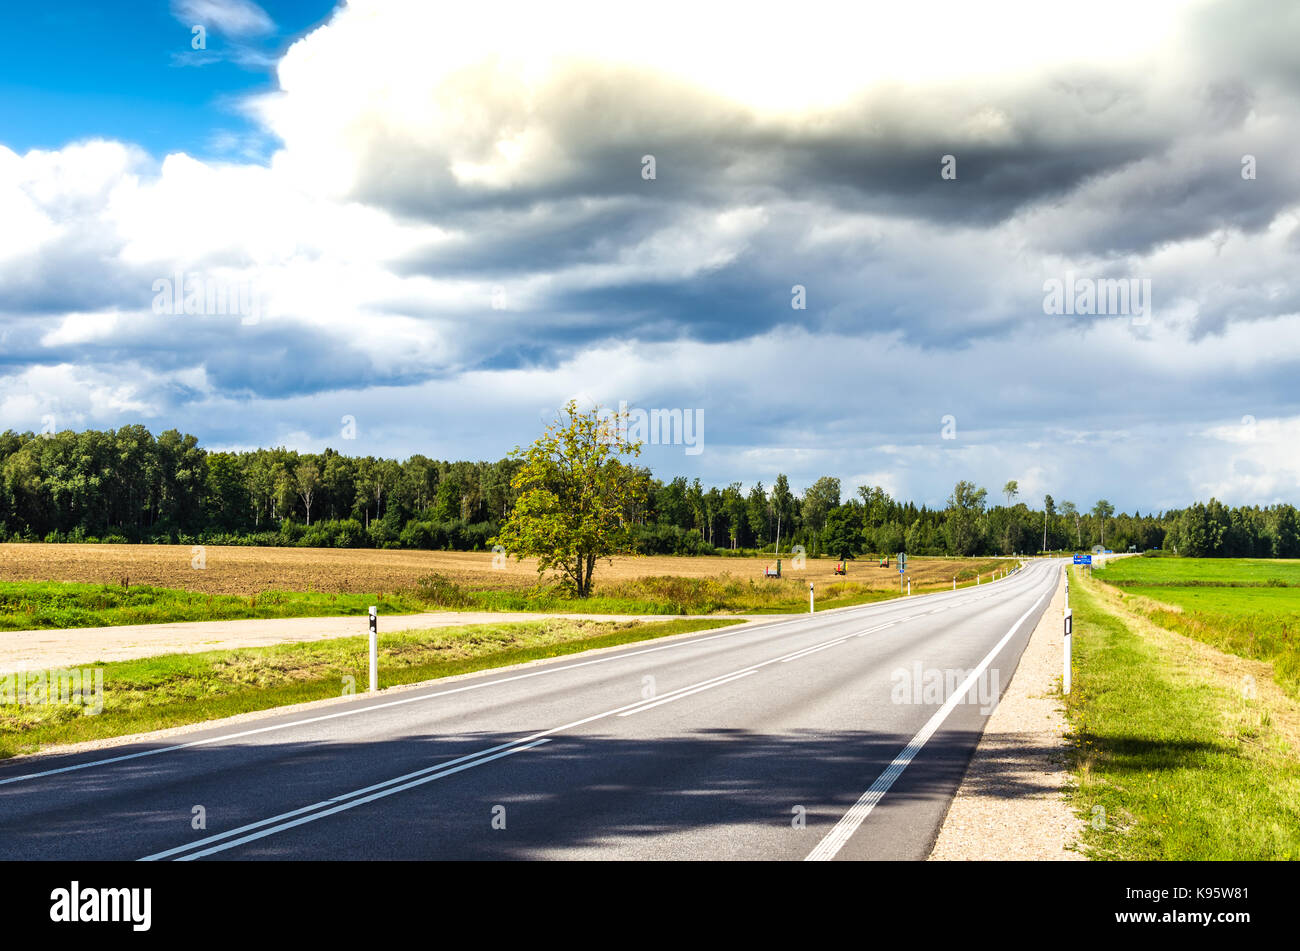 A road in the countryside under a cloudy sky Stock Photo